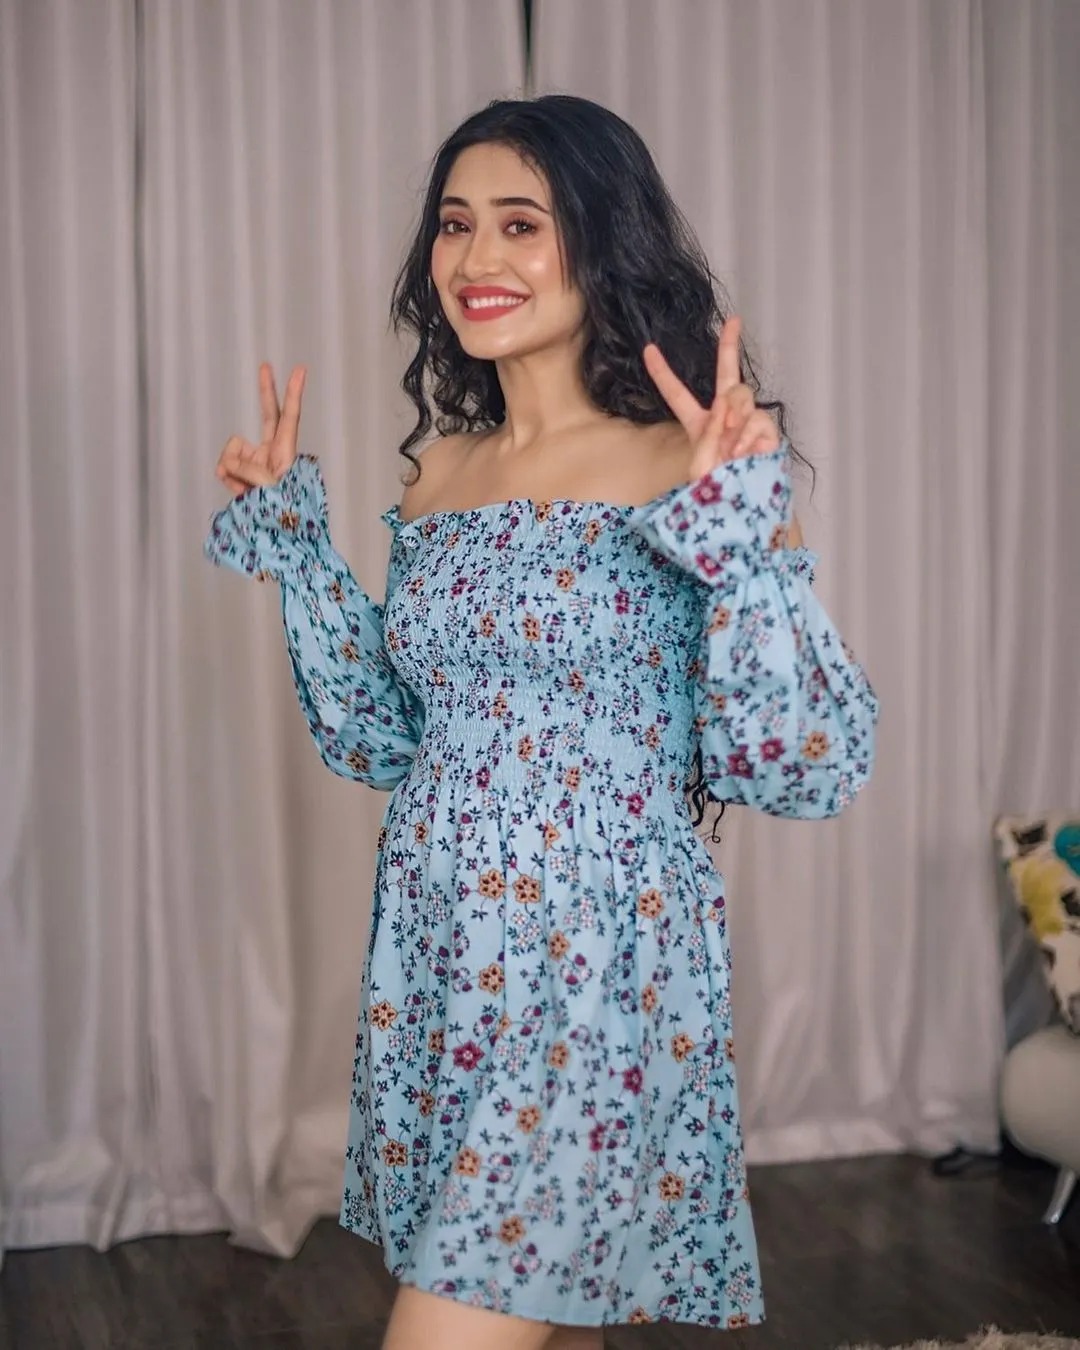 From Shivangi Joshi to Mouni Roy: Which actress slayed in a floral printed dress? 11961